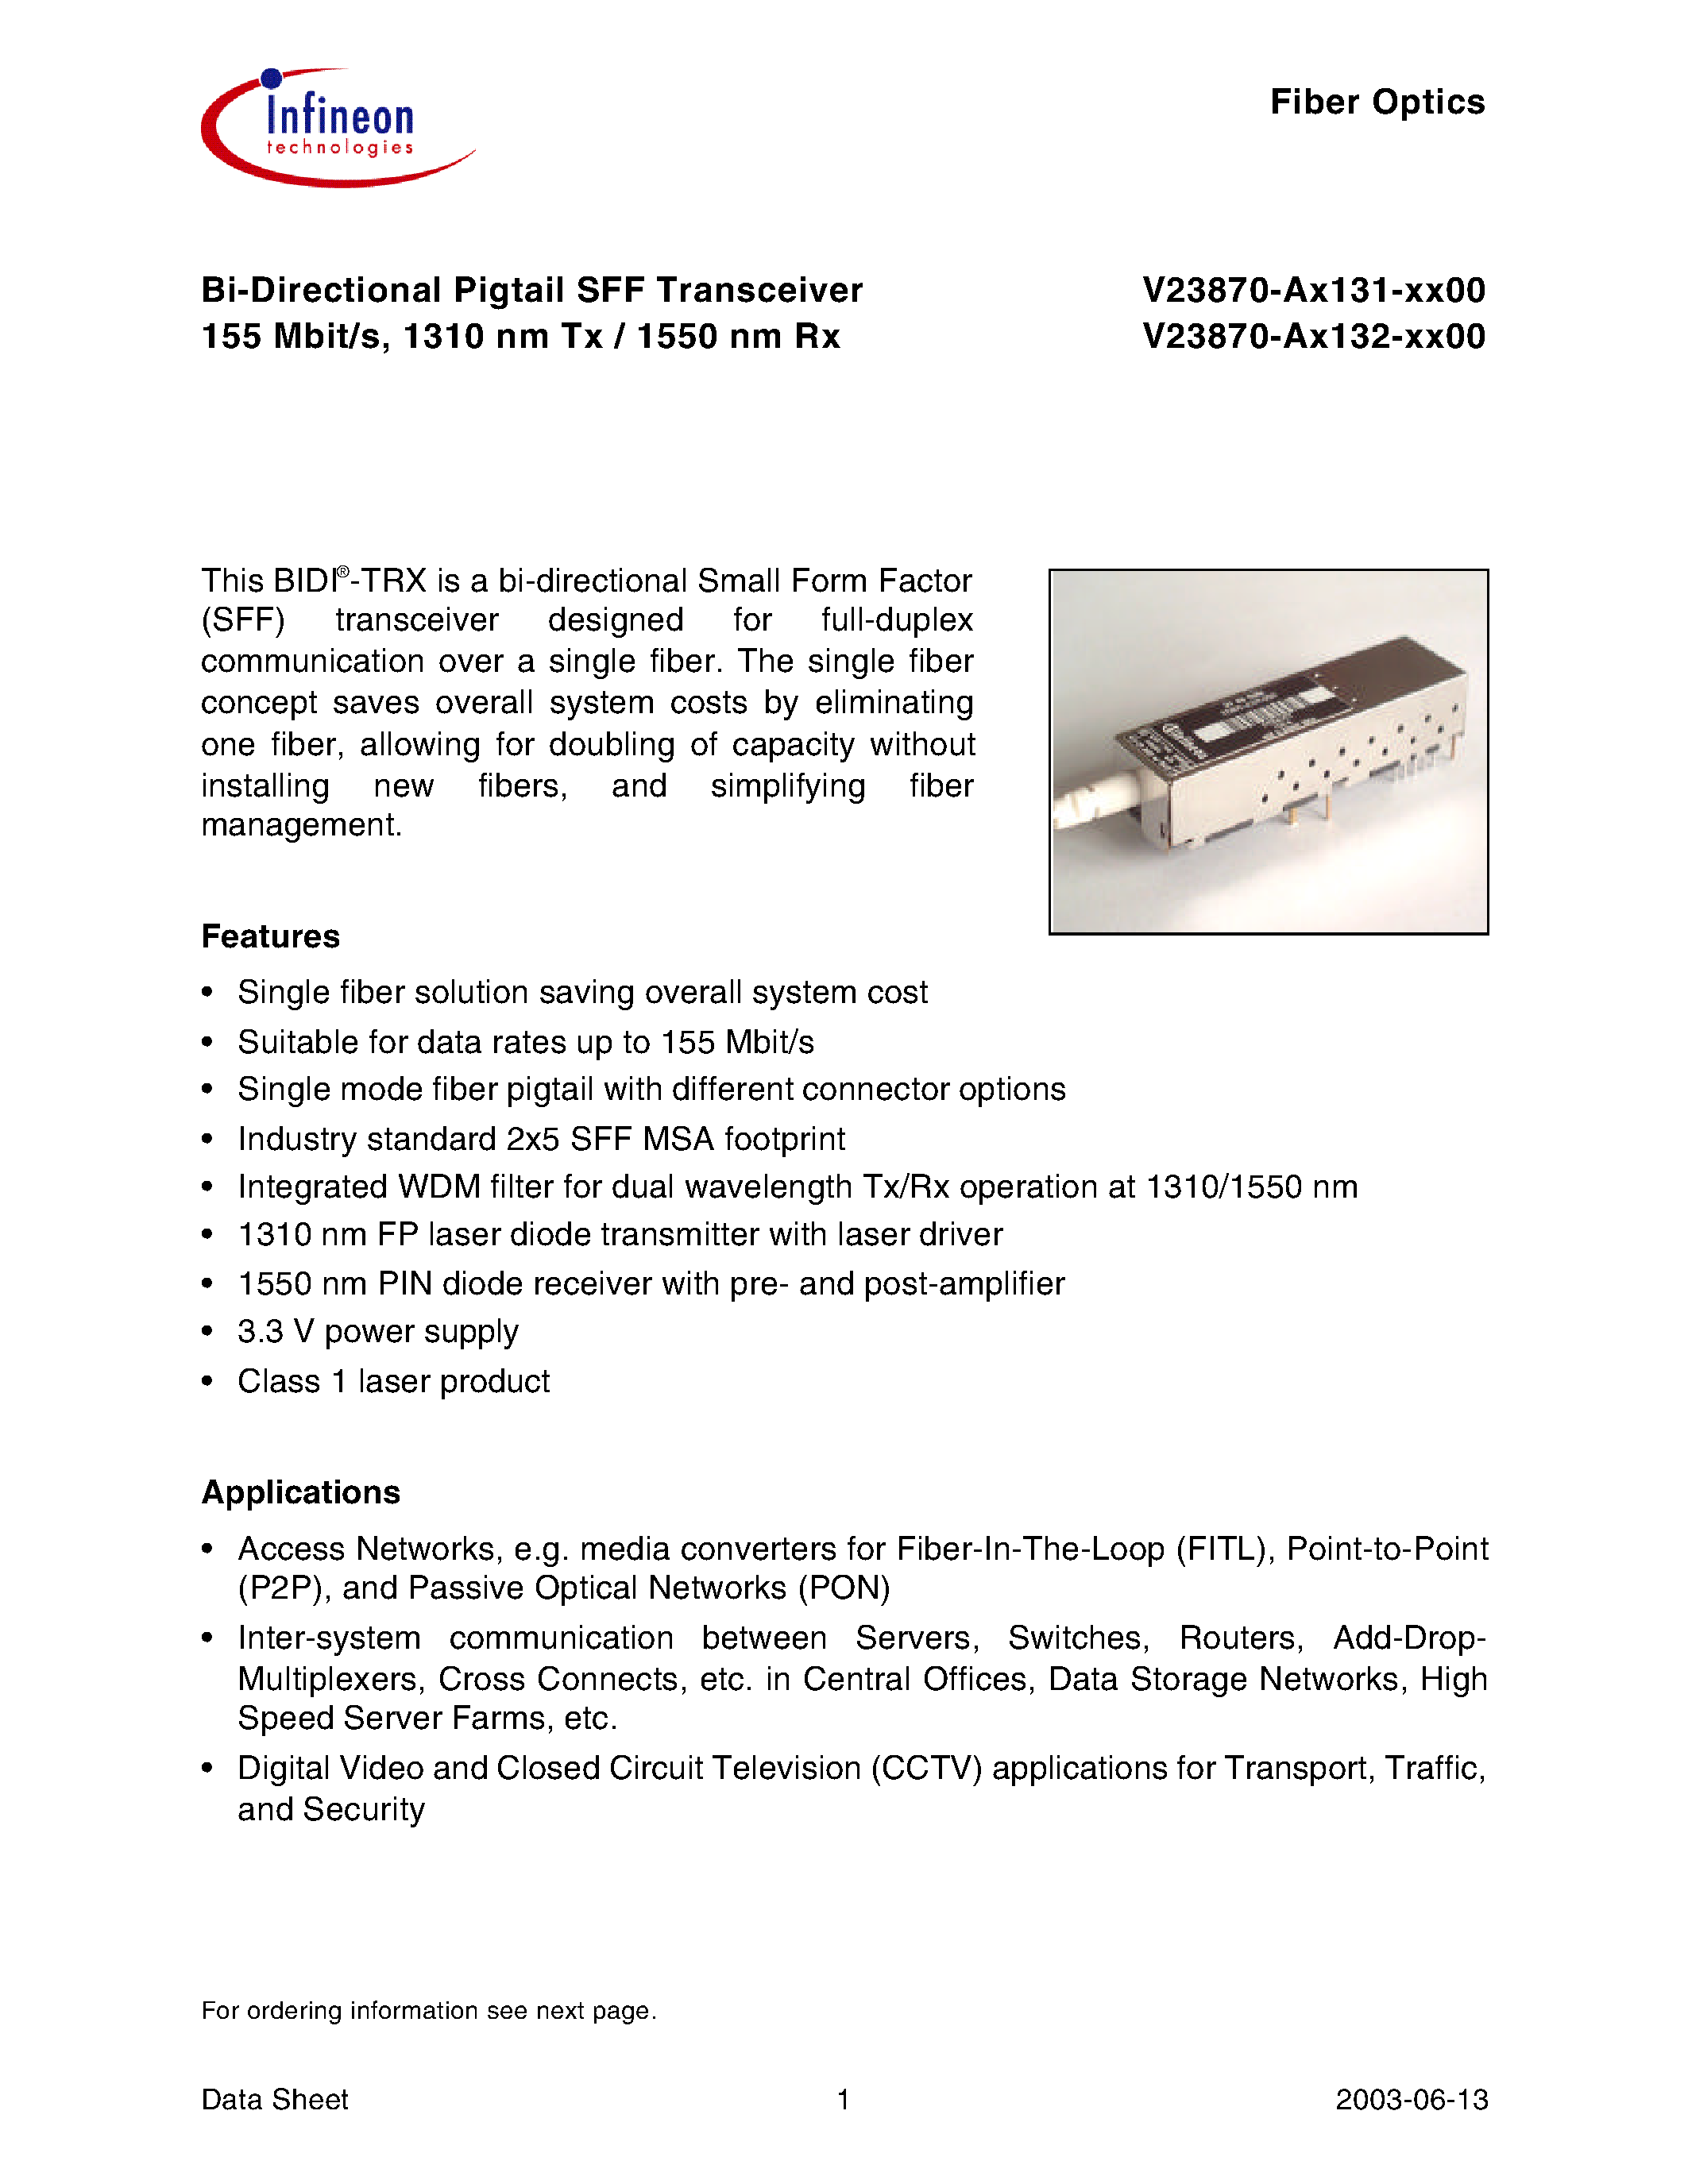 Datasheet V23870-A3132-C500 - Bi-Directional Pigtail SFF Transceiver 155 Mbit/s/ 1310 nm Tx / 1550 nm Rx page 1